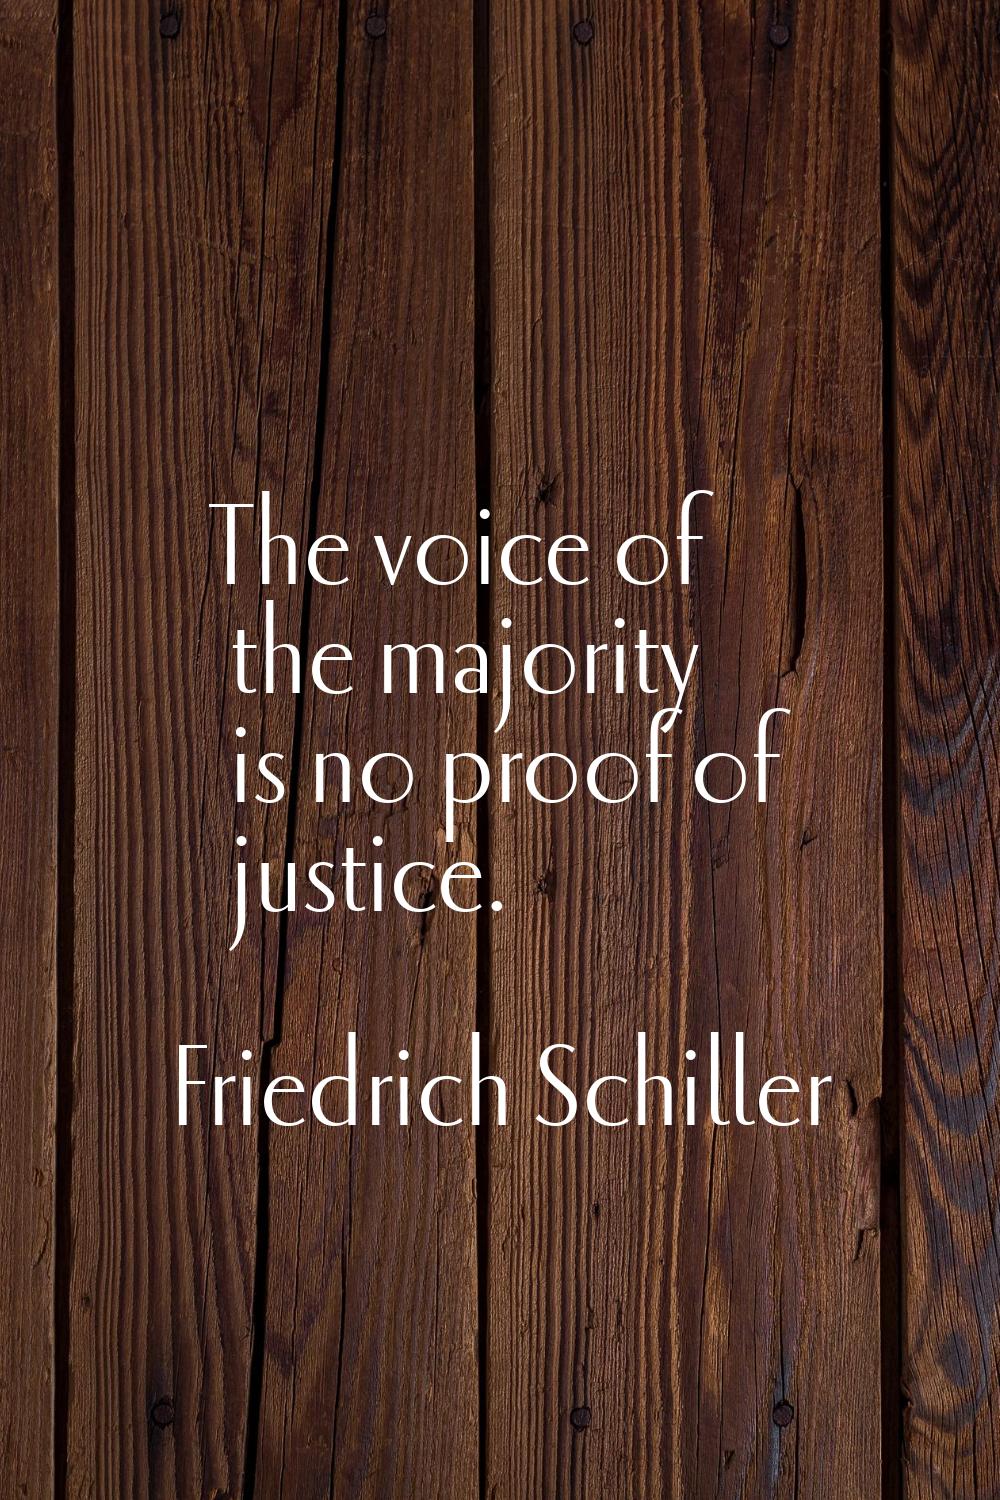 The voice of the majority is no proof of justice.